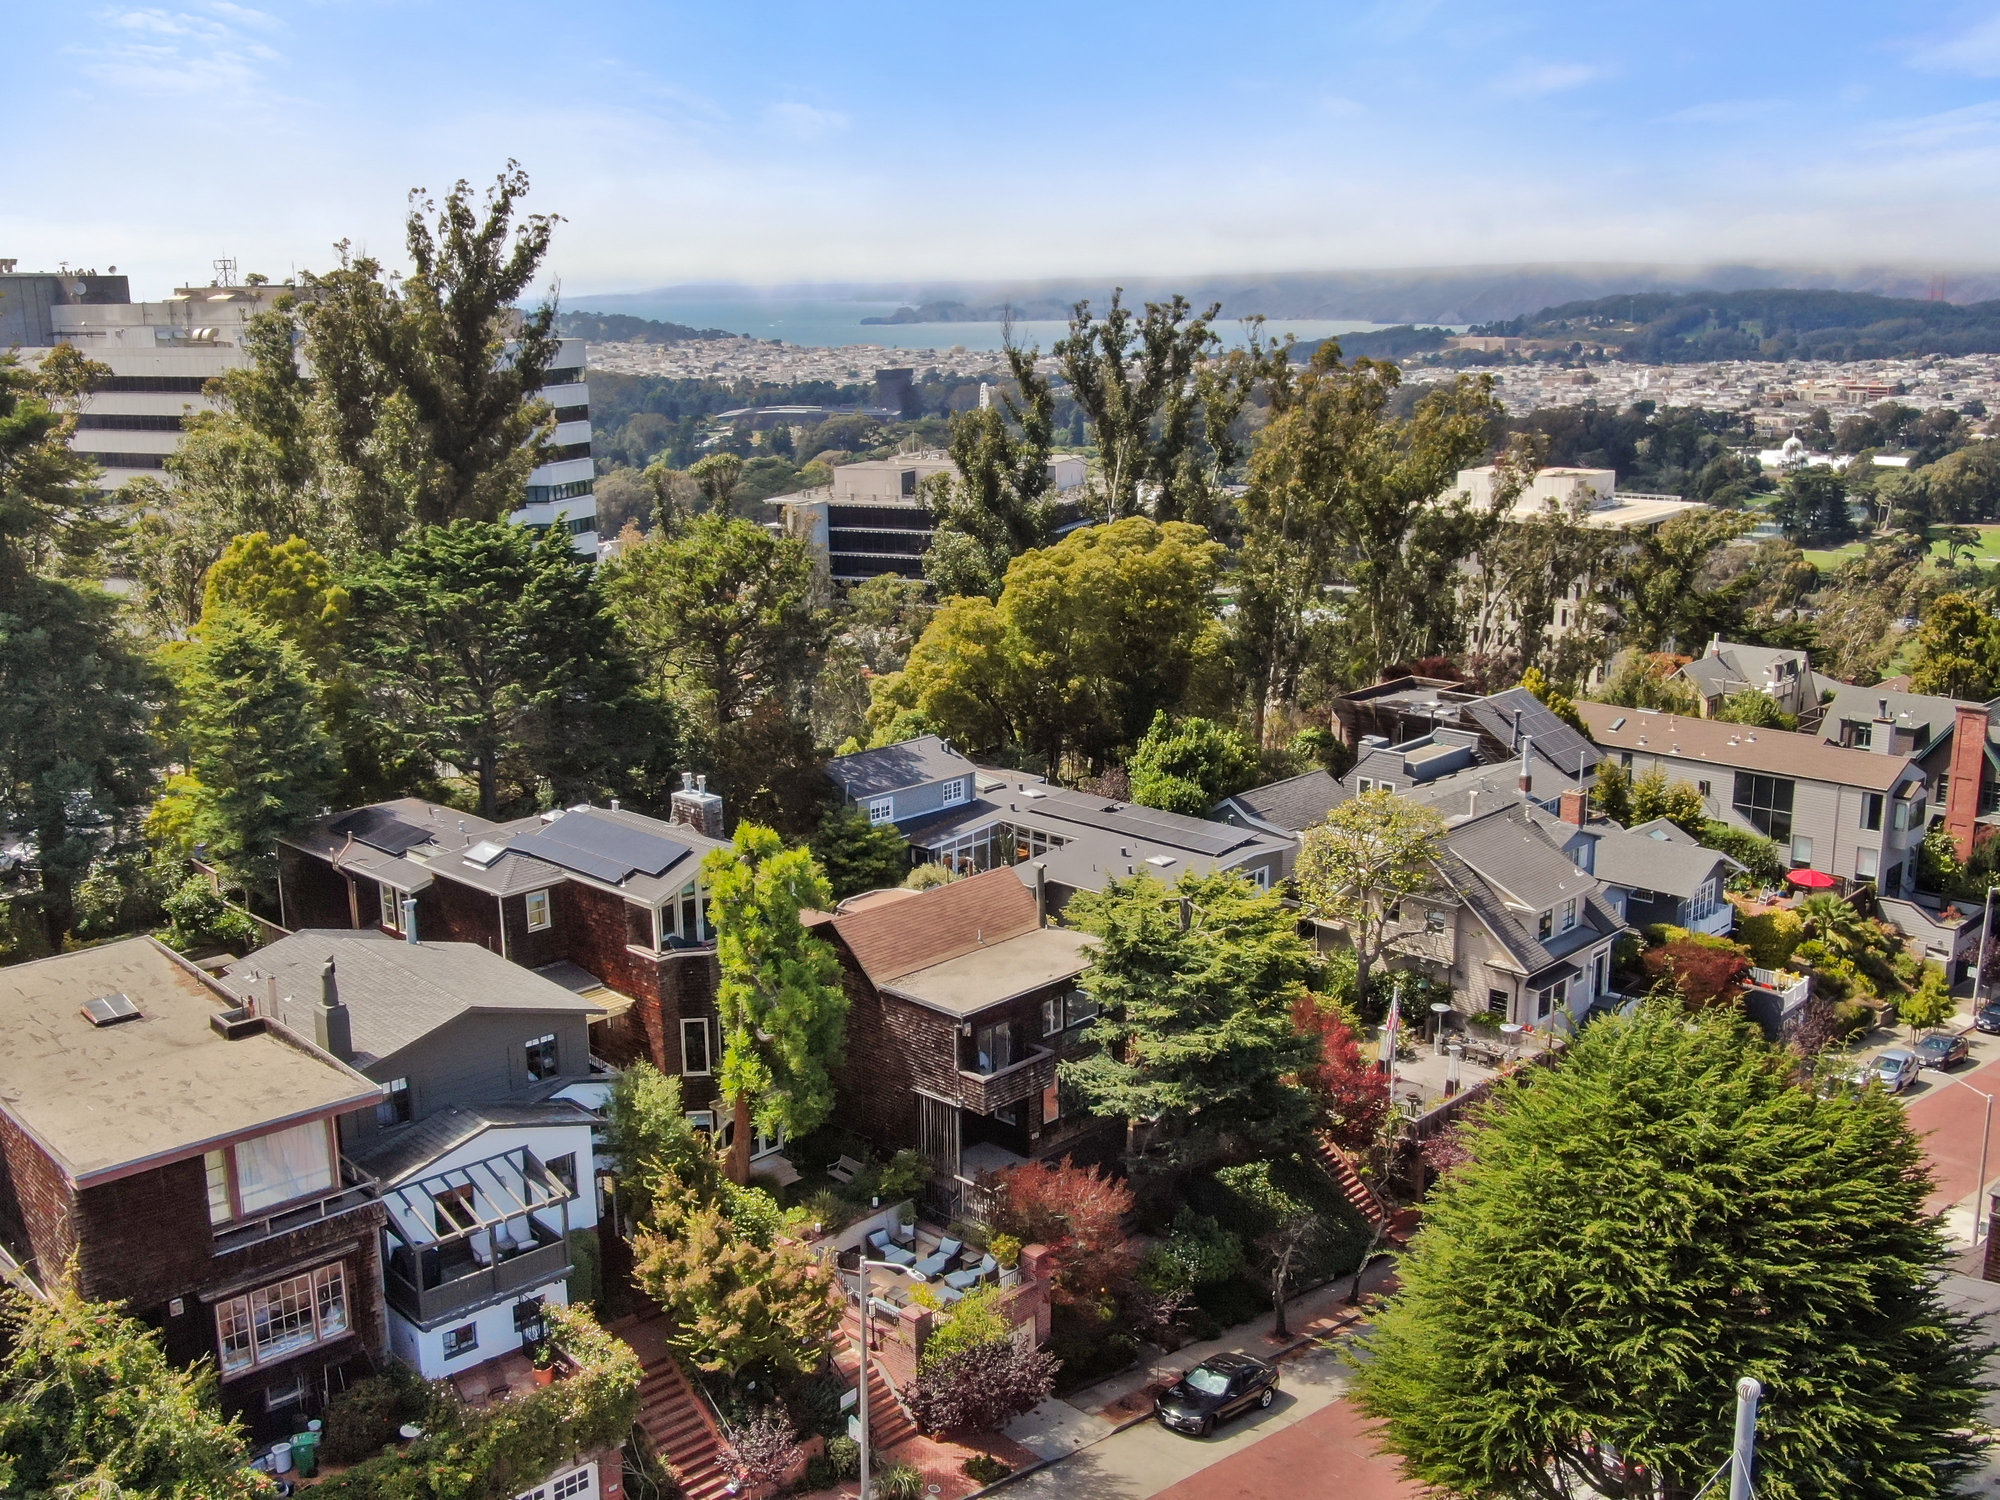 Property Photo: Aerial view of 183 Edgewood Avenue, showing proximity to San Francisco Bay